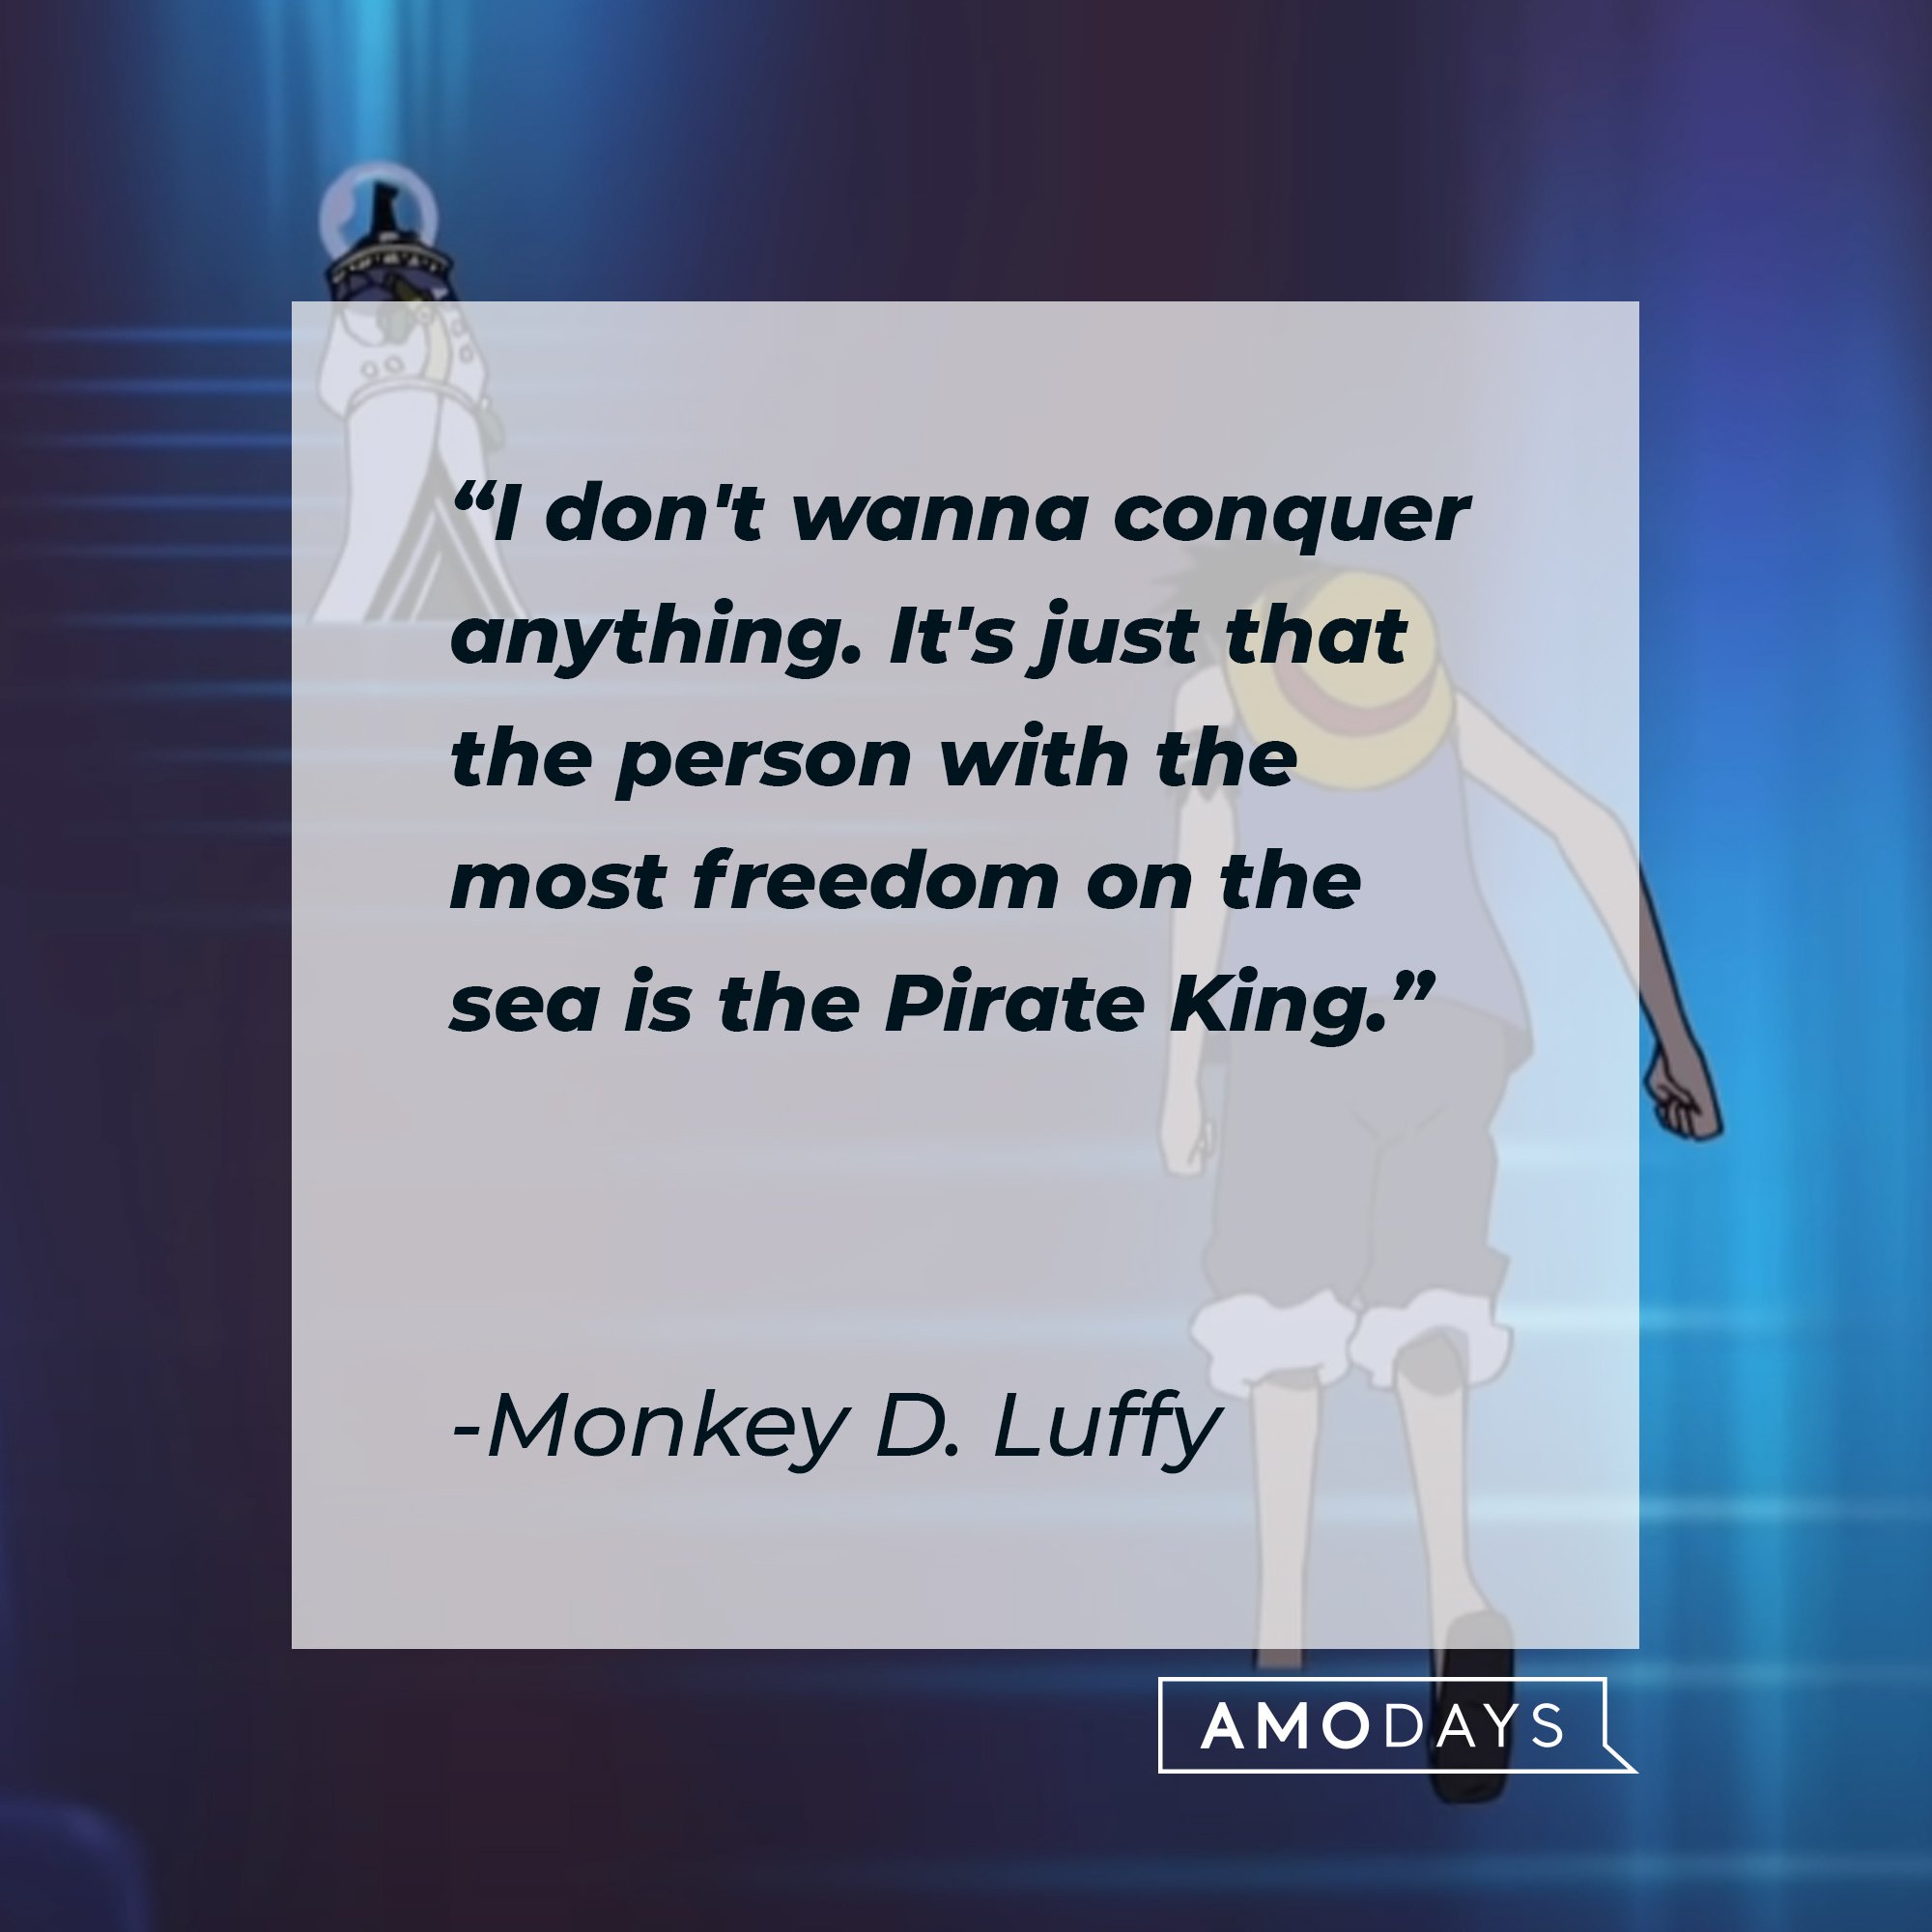 Monkey D. Luffy's quote: "I don't wanna conquer anything. It's just that the person with the most freedom on the sea is the Pirate King." | Image: AmoDays